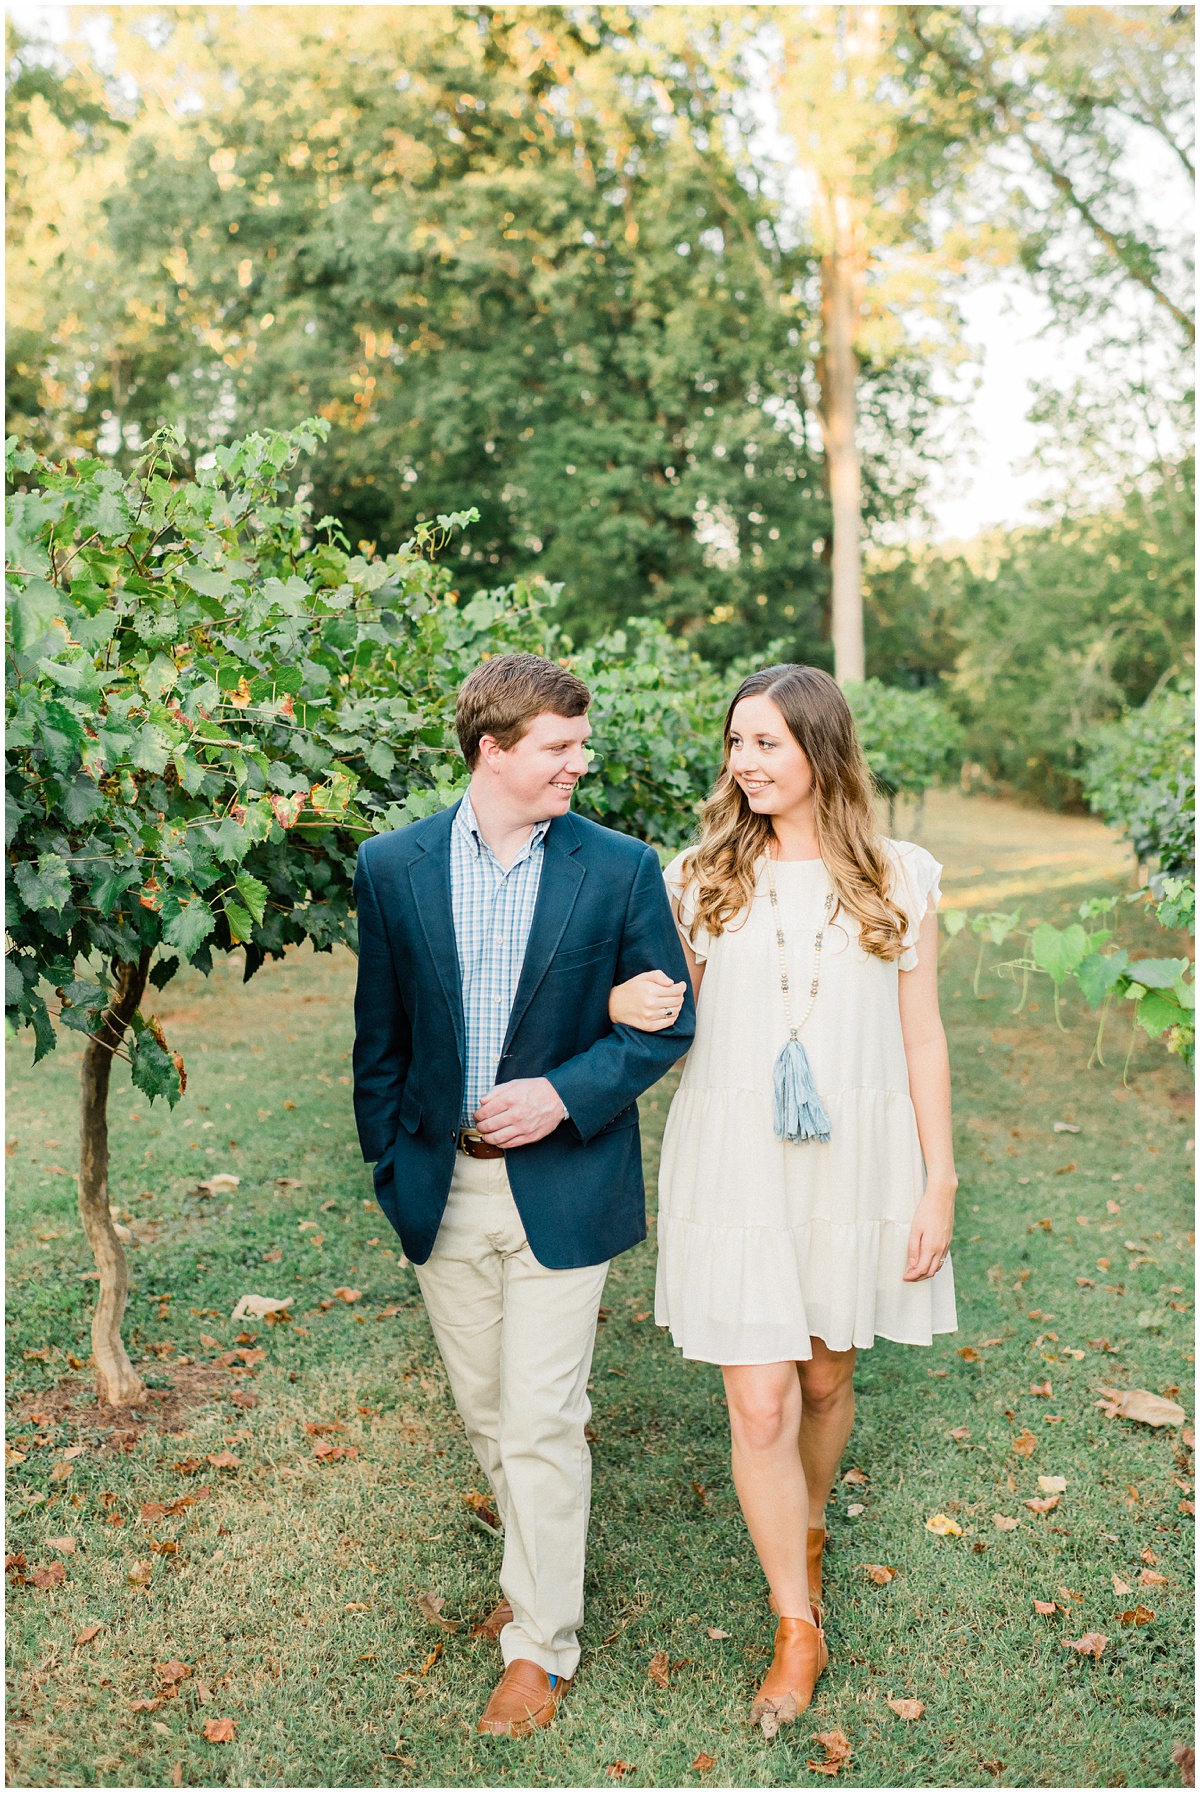 City Scape Winery Engagement